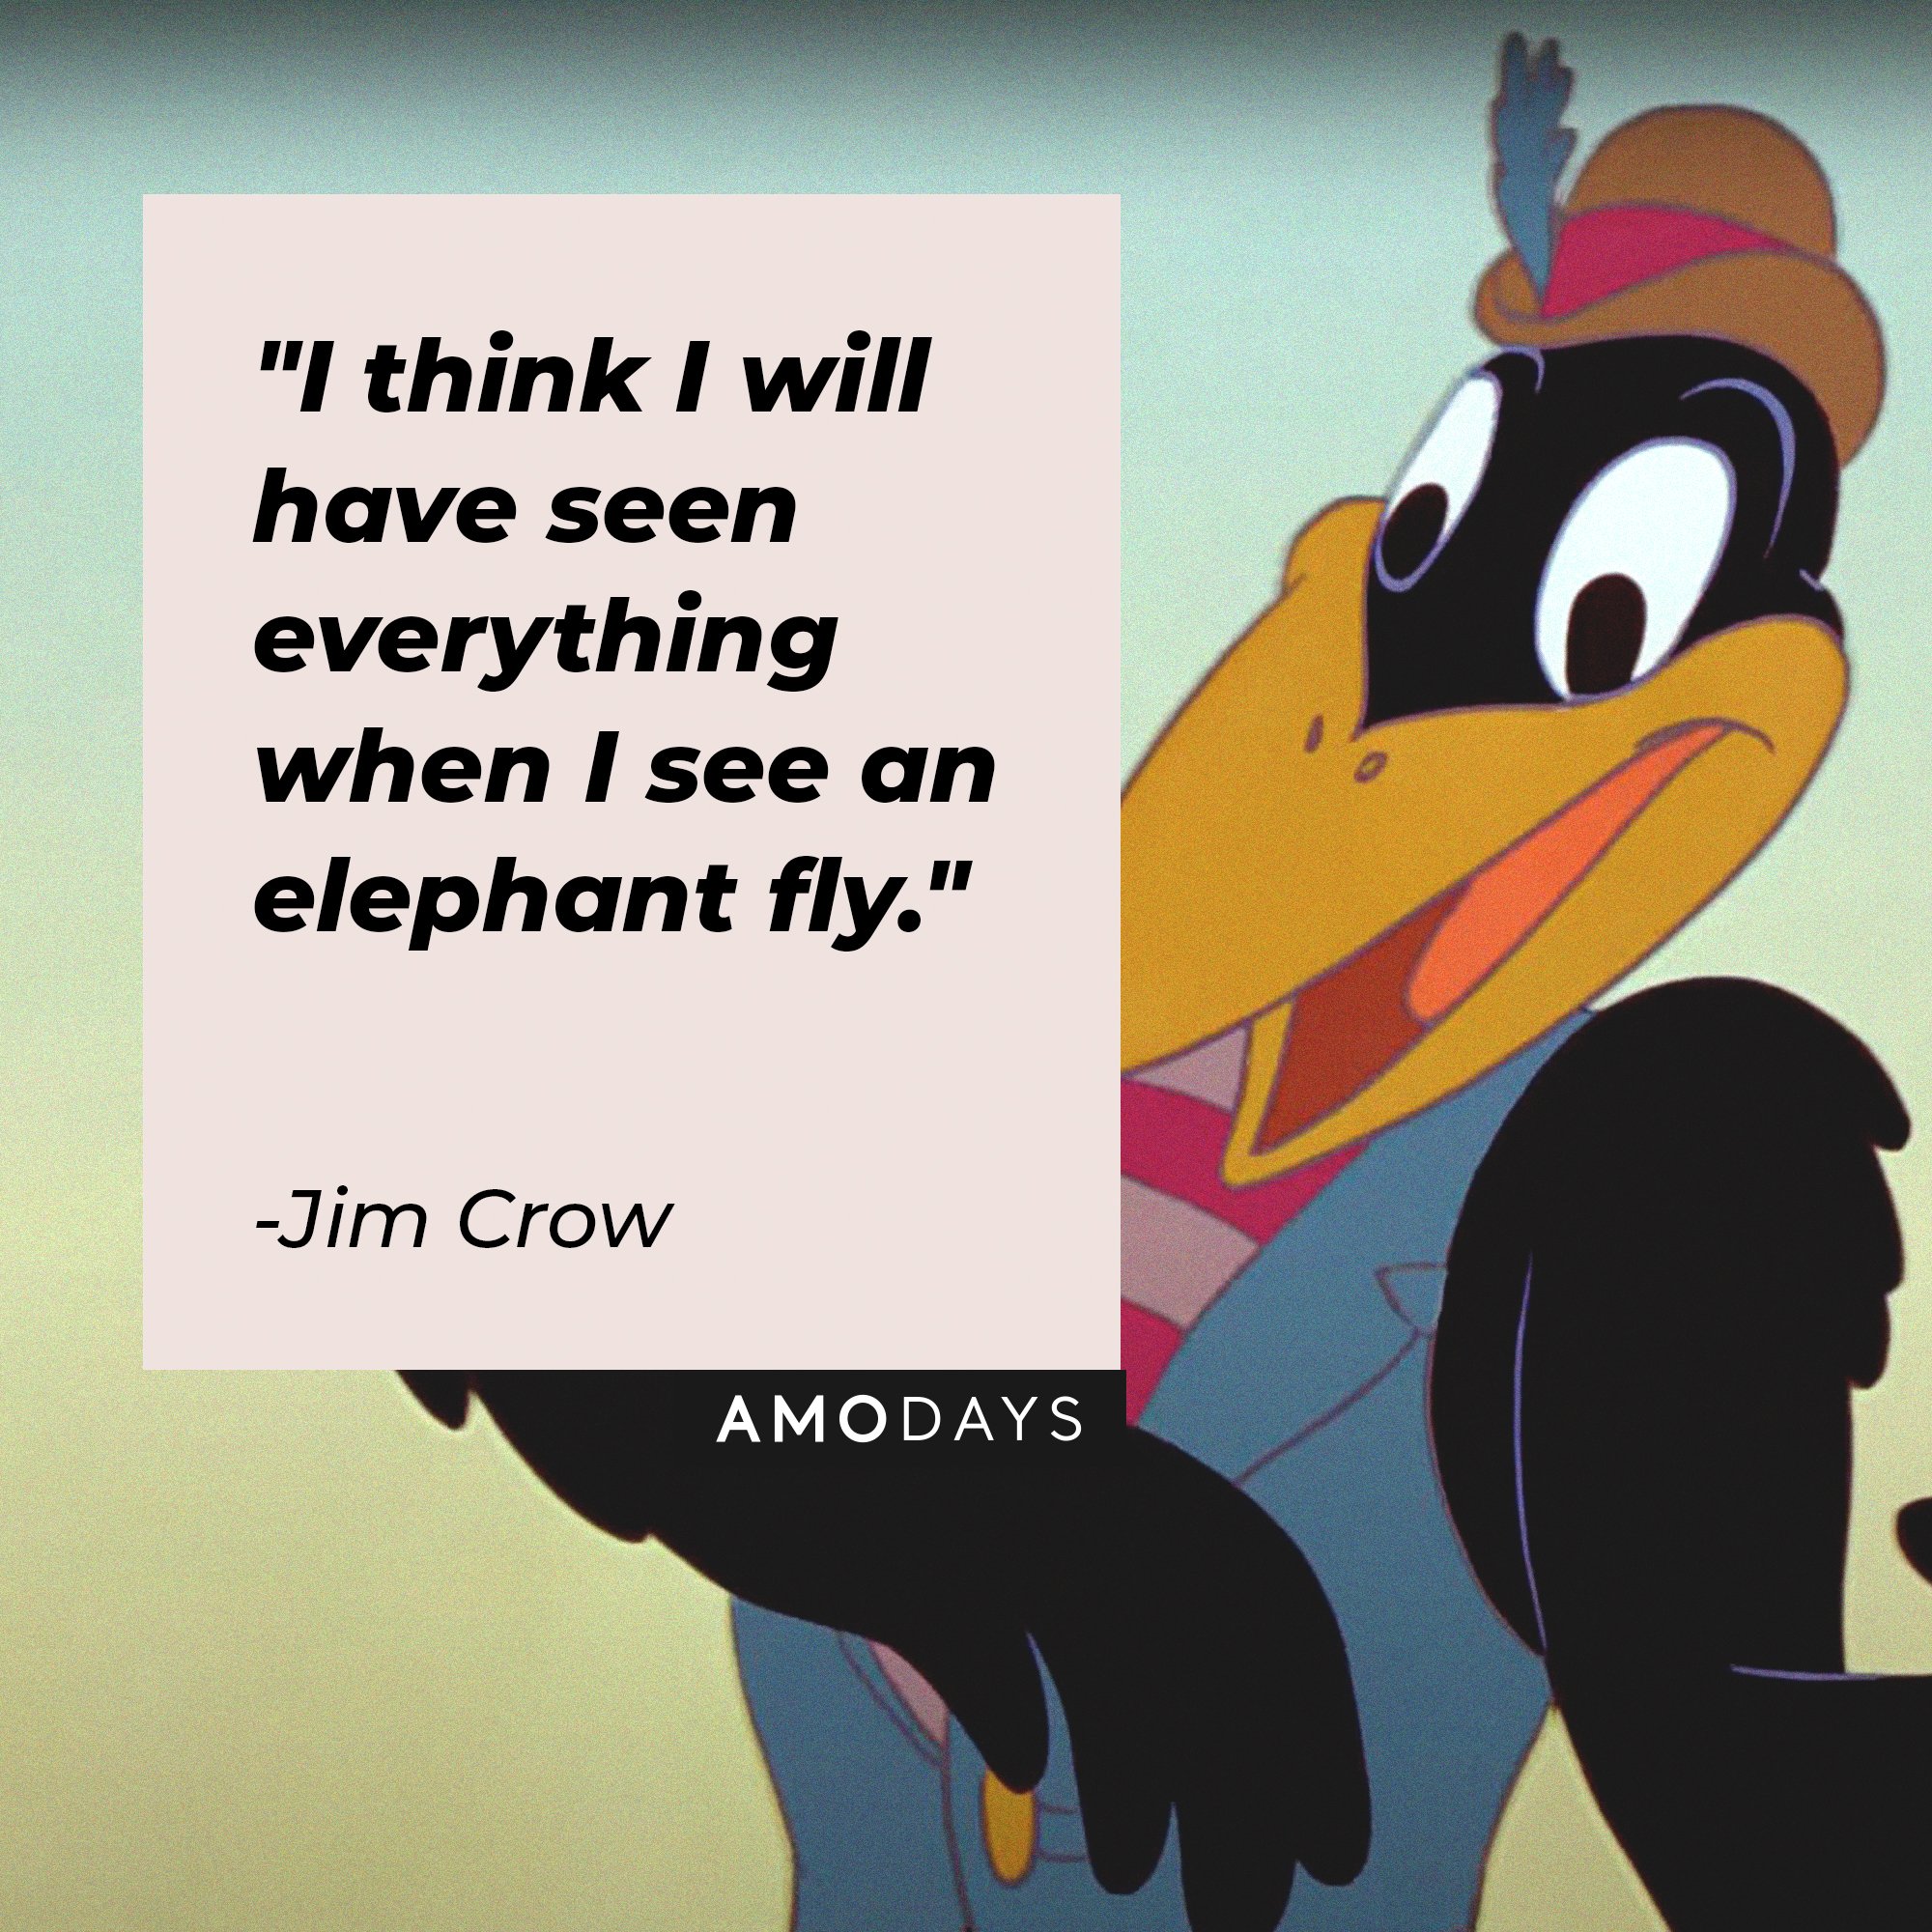  Jim Crow’s quote: "I think I will have seen everything when I see an elephant fly."  | Image: AmoDays   